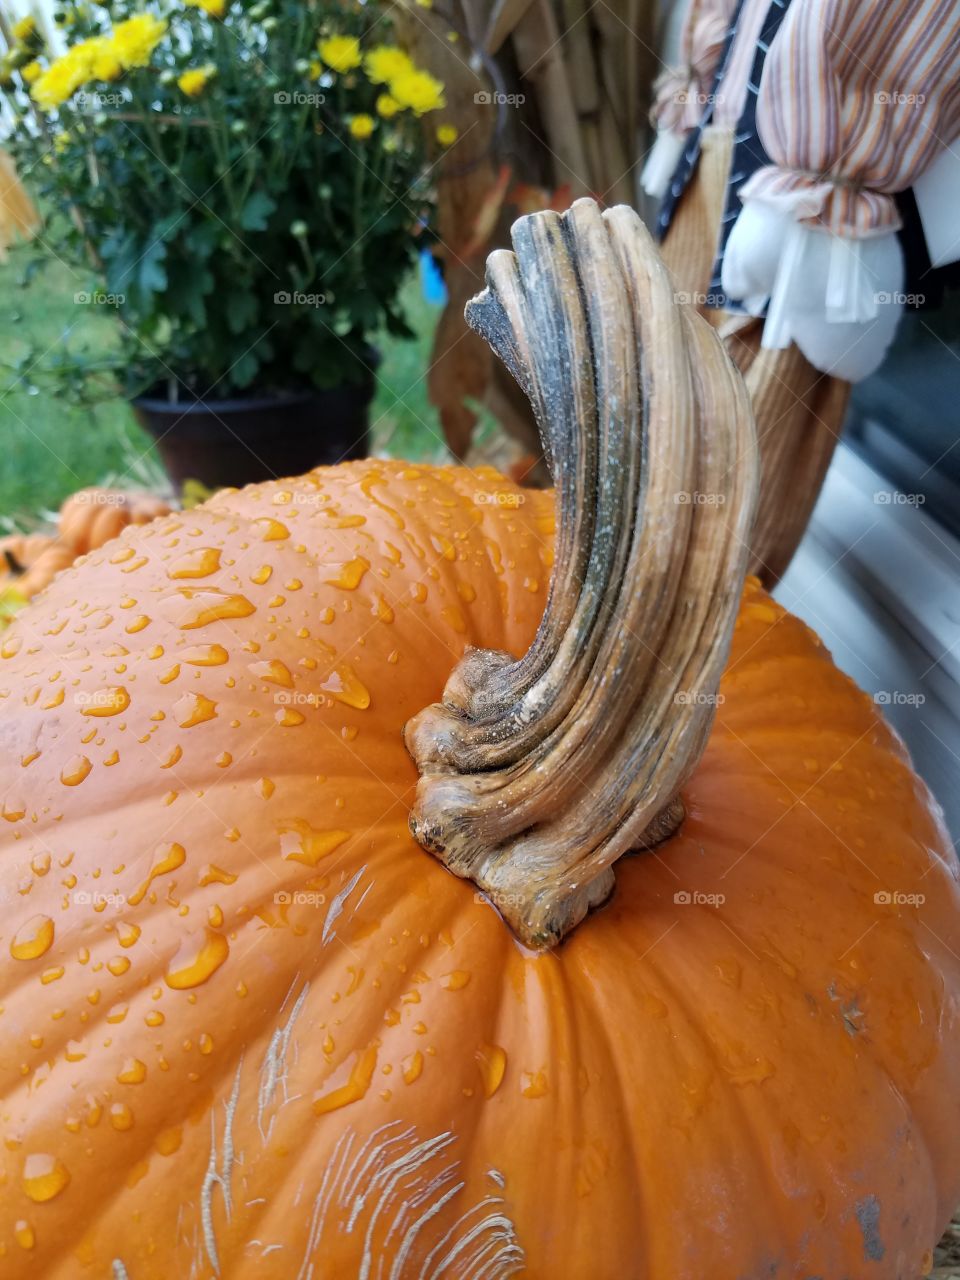 I found a pumpkin this past fall with the most amazing stem! It was the most perfect addition to our fall display!